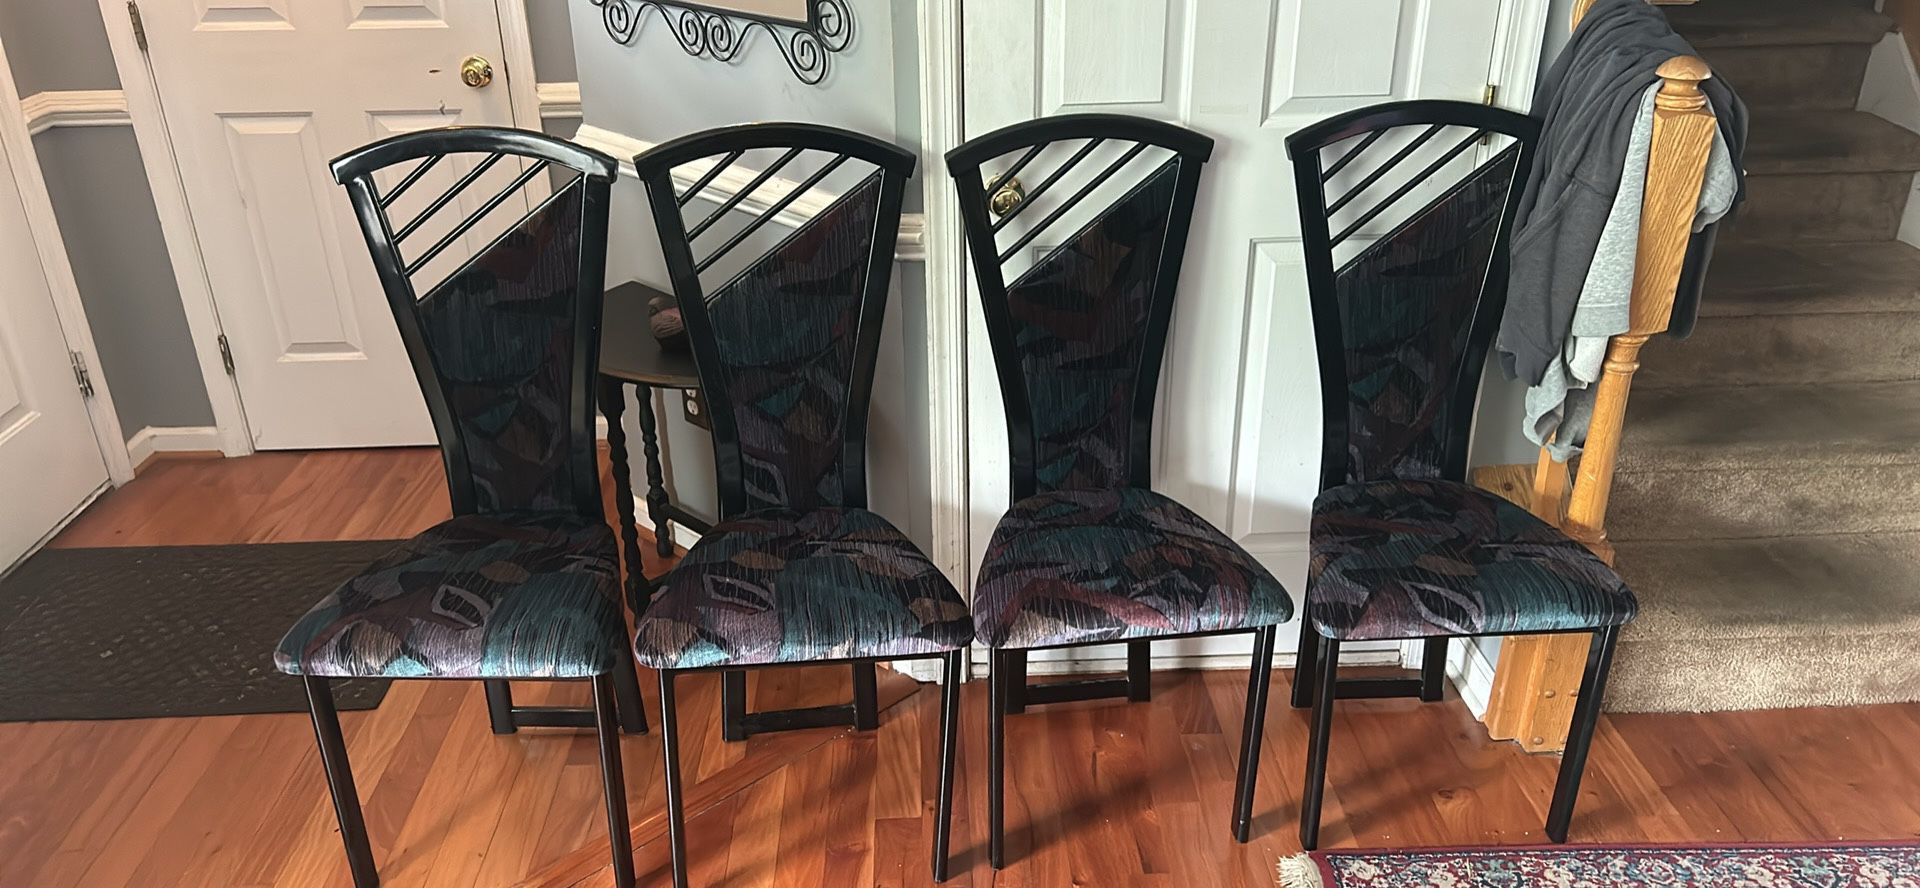 Set Of 4 Indoor Dining Chairs 